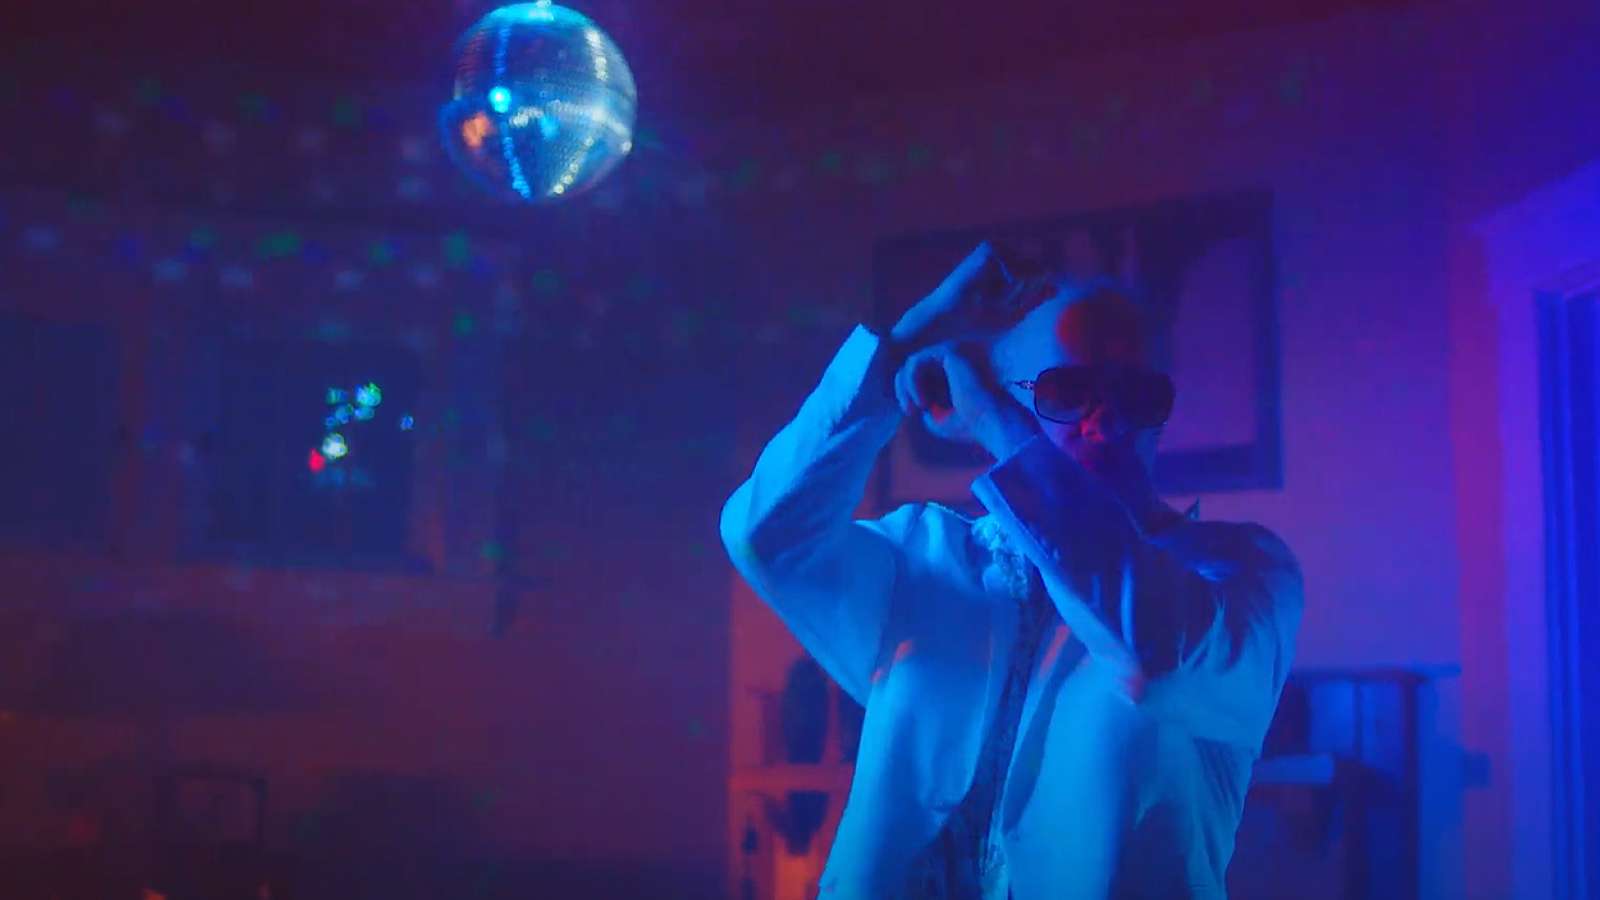 person dancing in house under a lighted mirrored disco ball